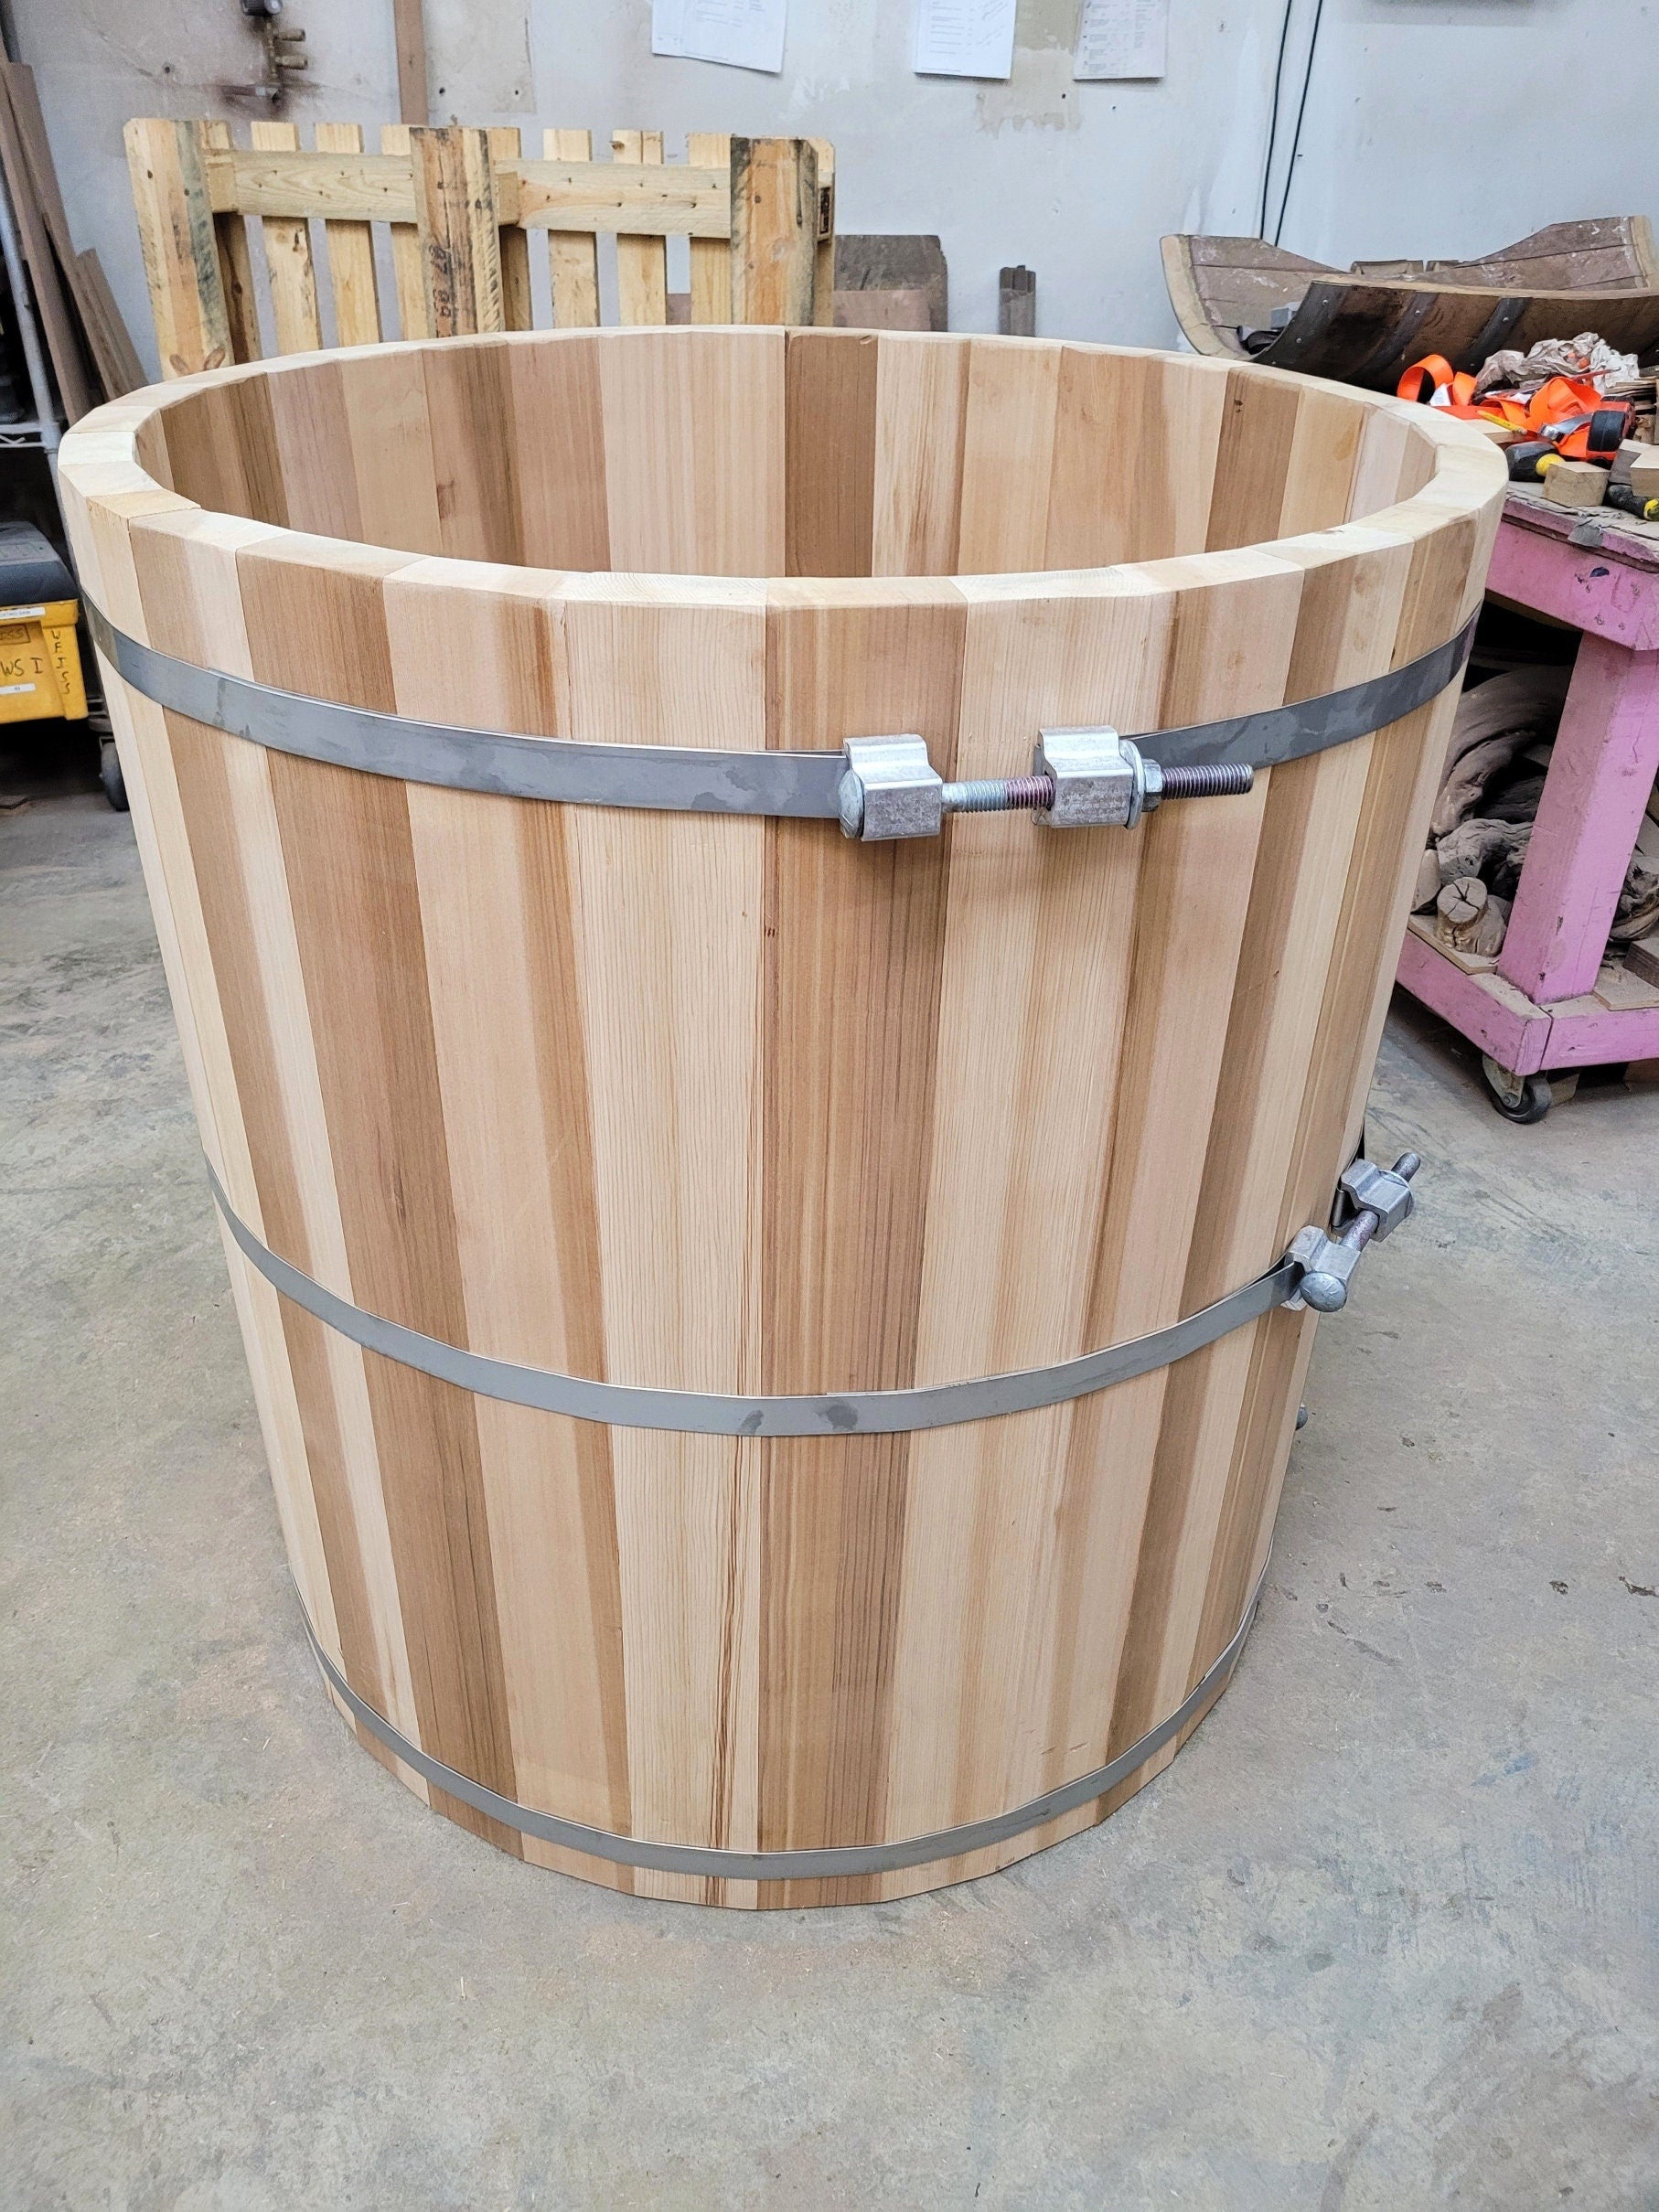 Miso Barrel for making miso soup made from kiln dried cedar - Traditional Japanese Method Construction - 100% Organic